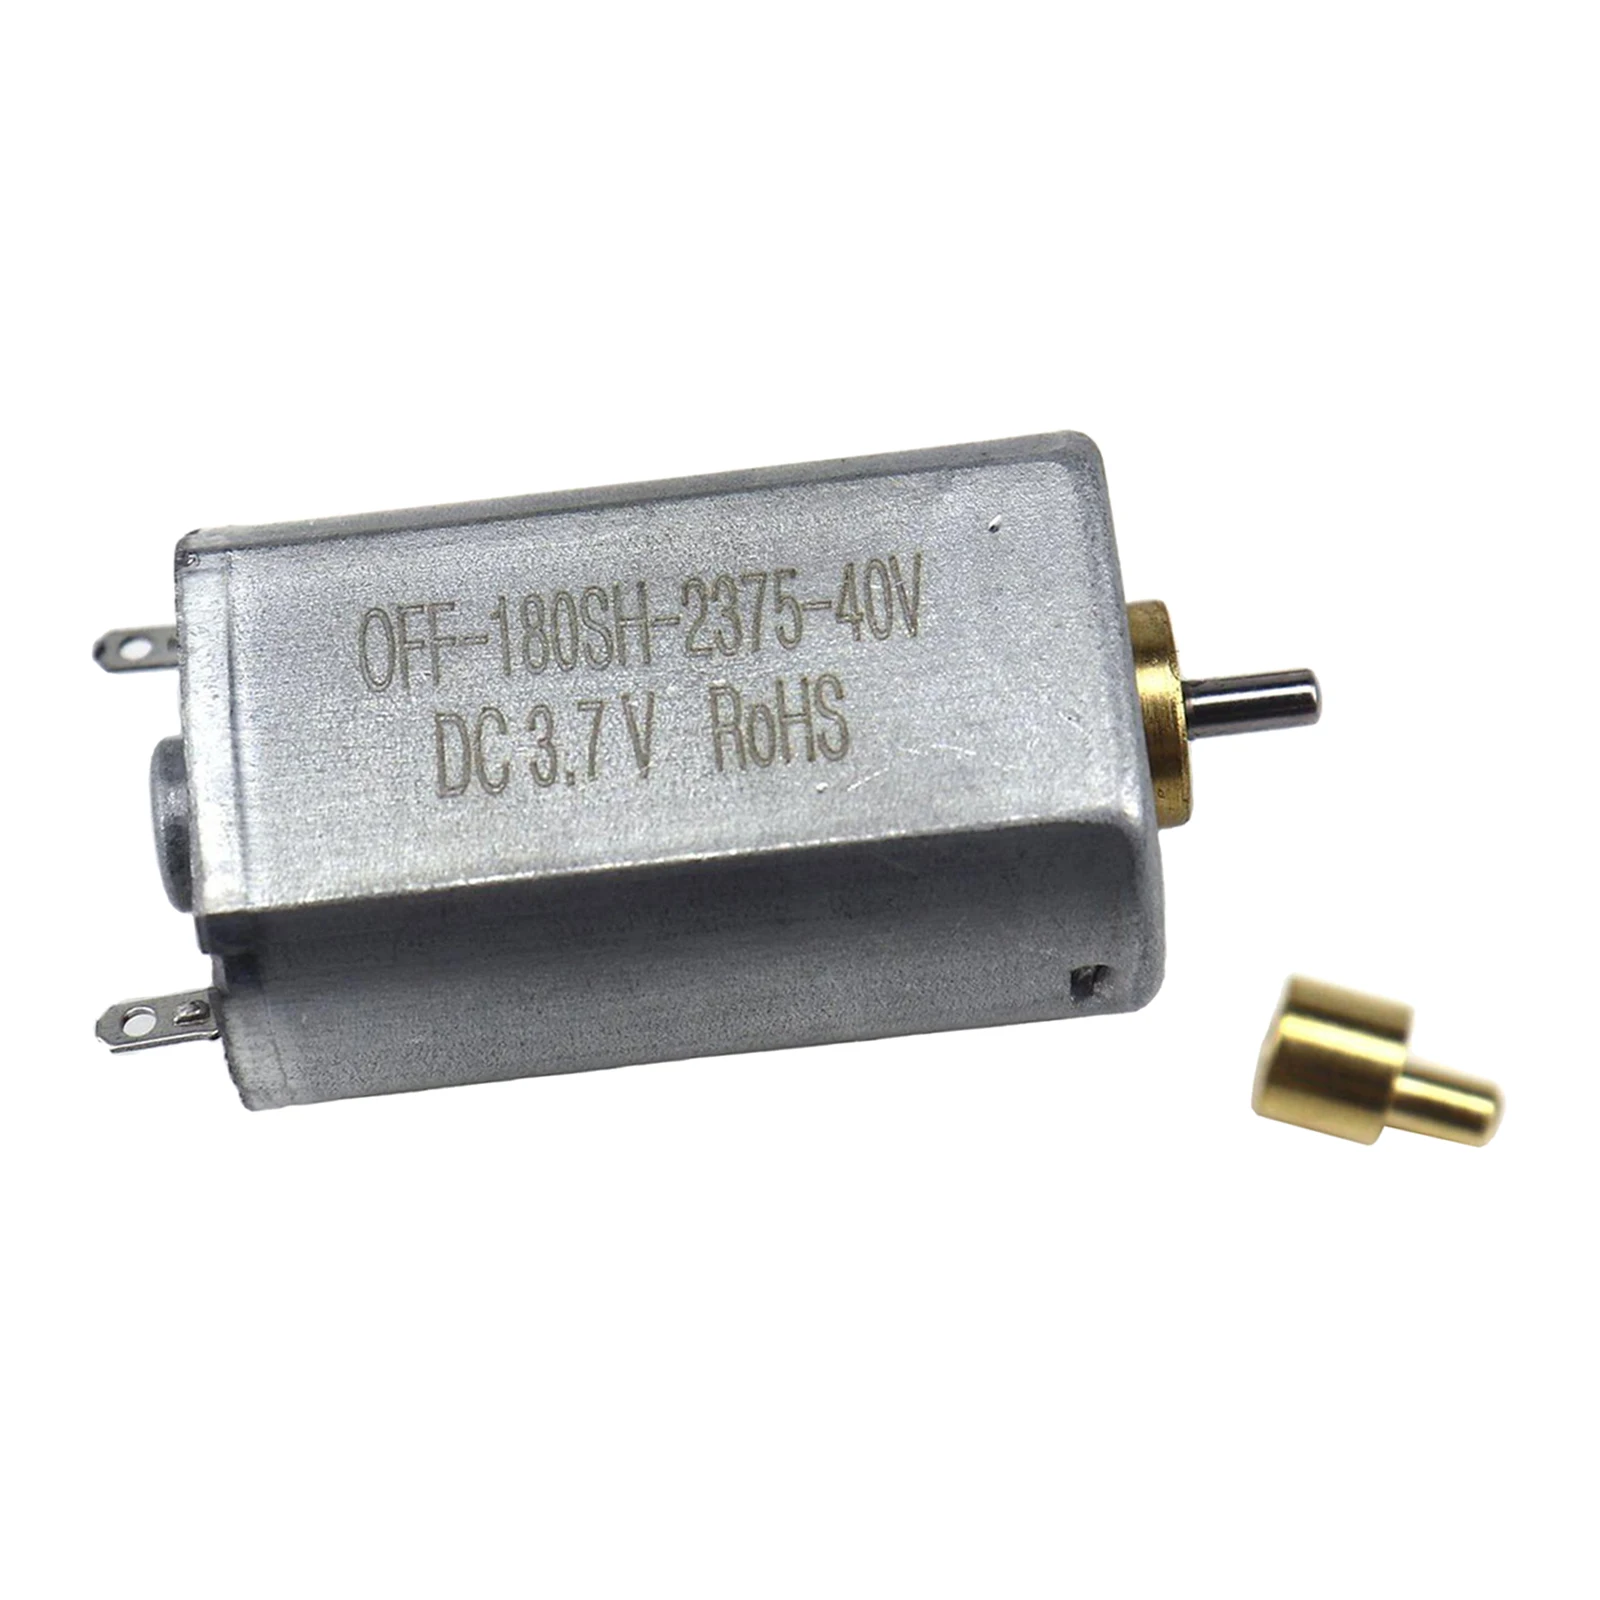 Hair Clipper Motor, DC 3.7 Electric Hair Clipper Motor Replacement, 7000 RPM High Speed, Fit for Andean D8, Hair Clippers